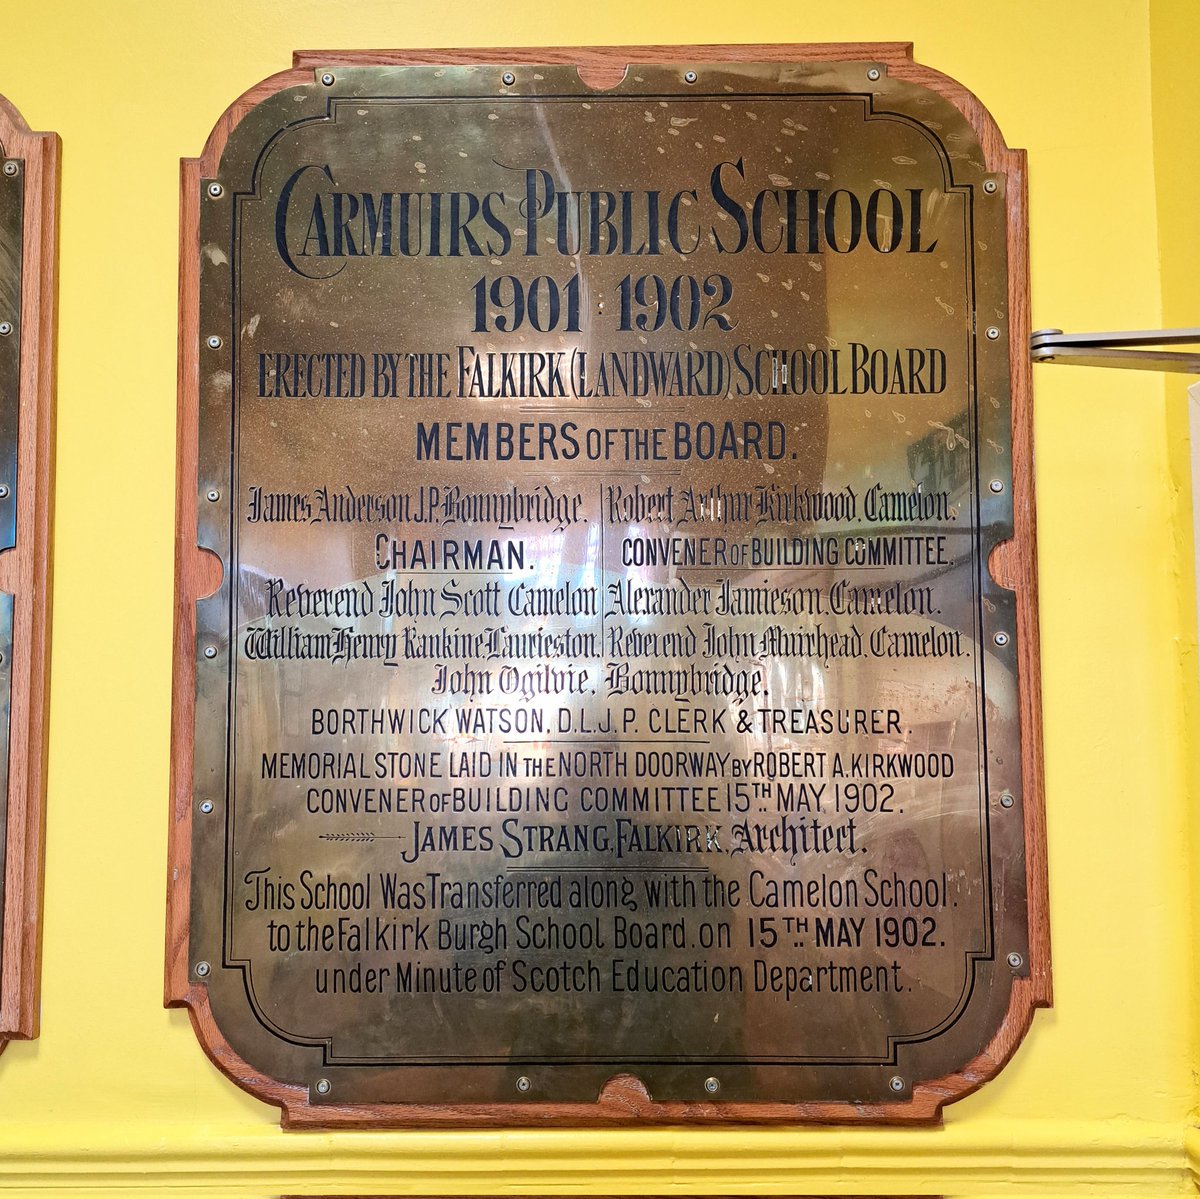 Wonderful visit to the historic @carmuirsprimary today arranging workshops for our community memorial to Covid - looking forward to it @greenspacescot #rememberingtogether